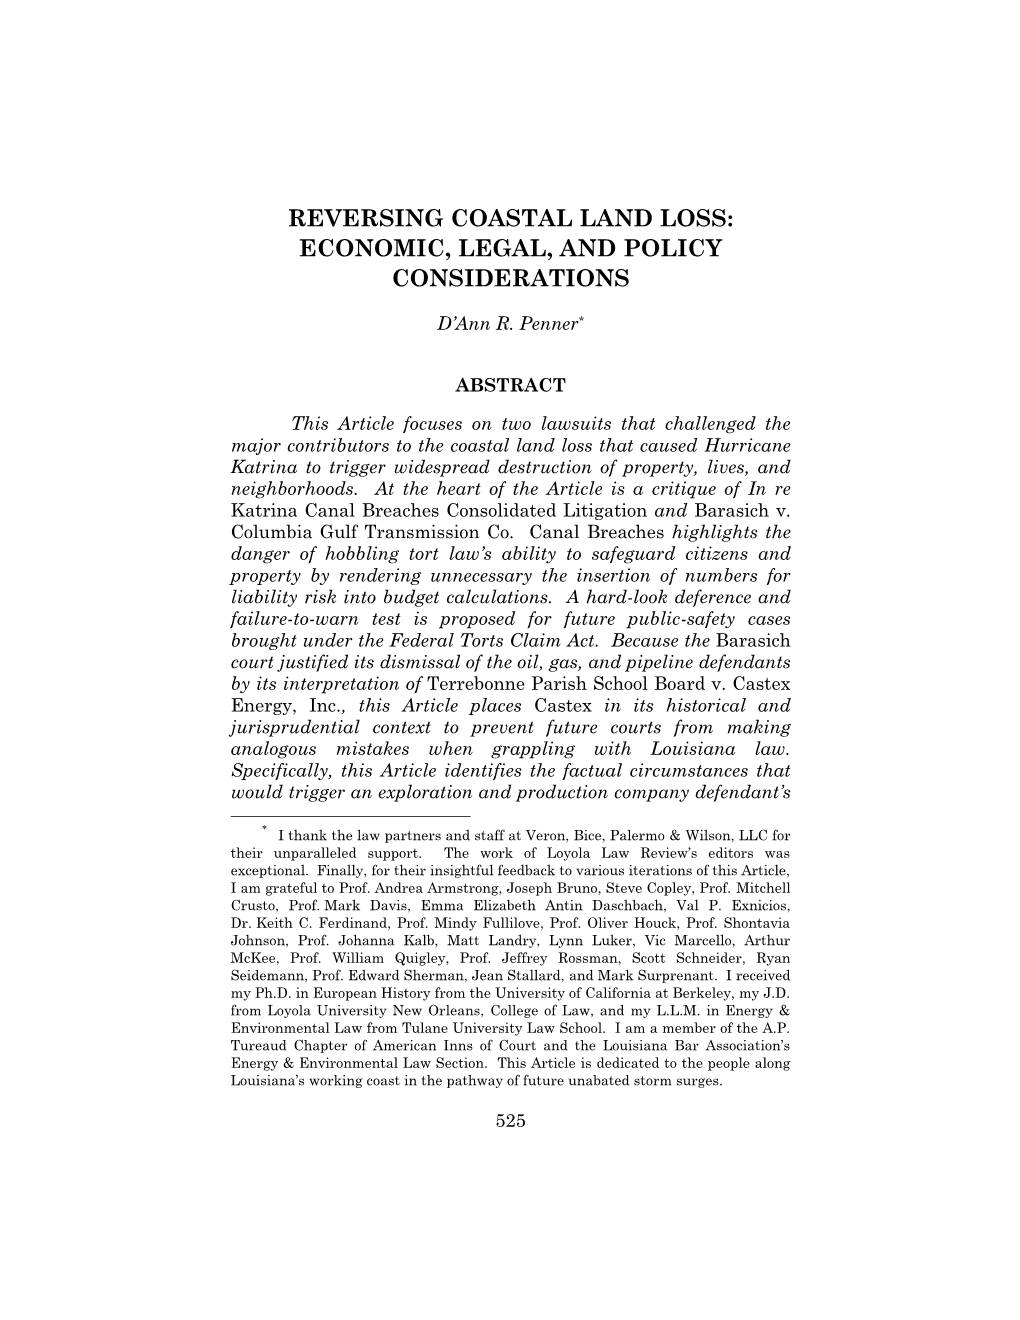 Reversing Coastal Land Loss: Economic, Legal, and Policy Considerations